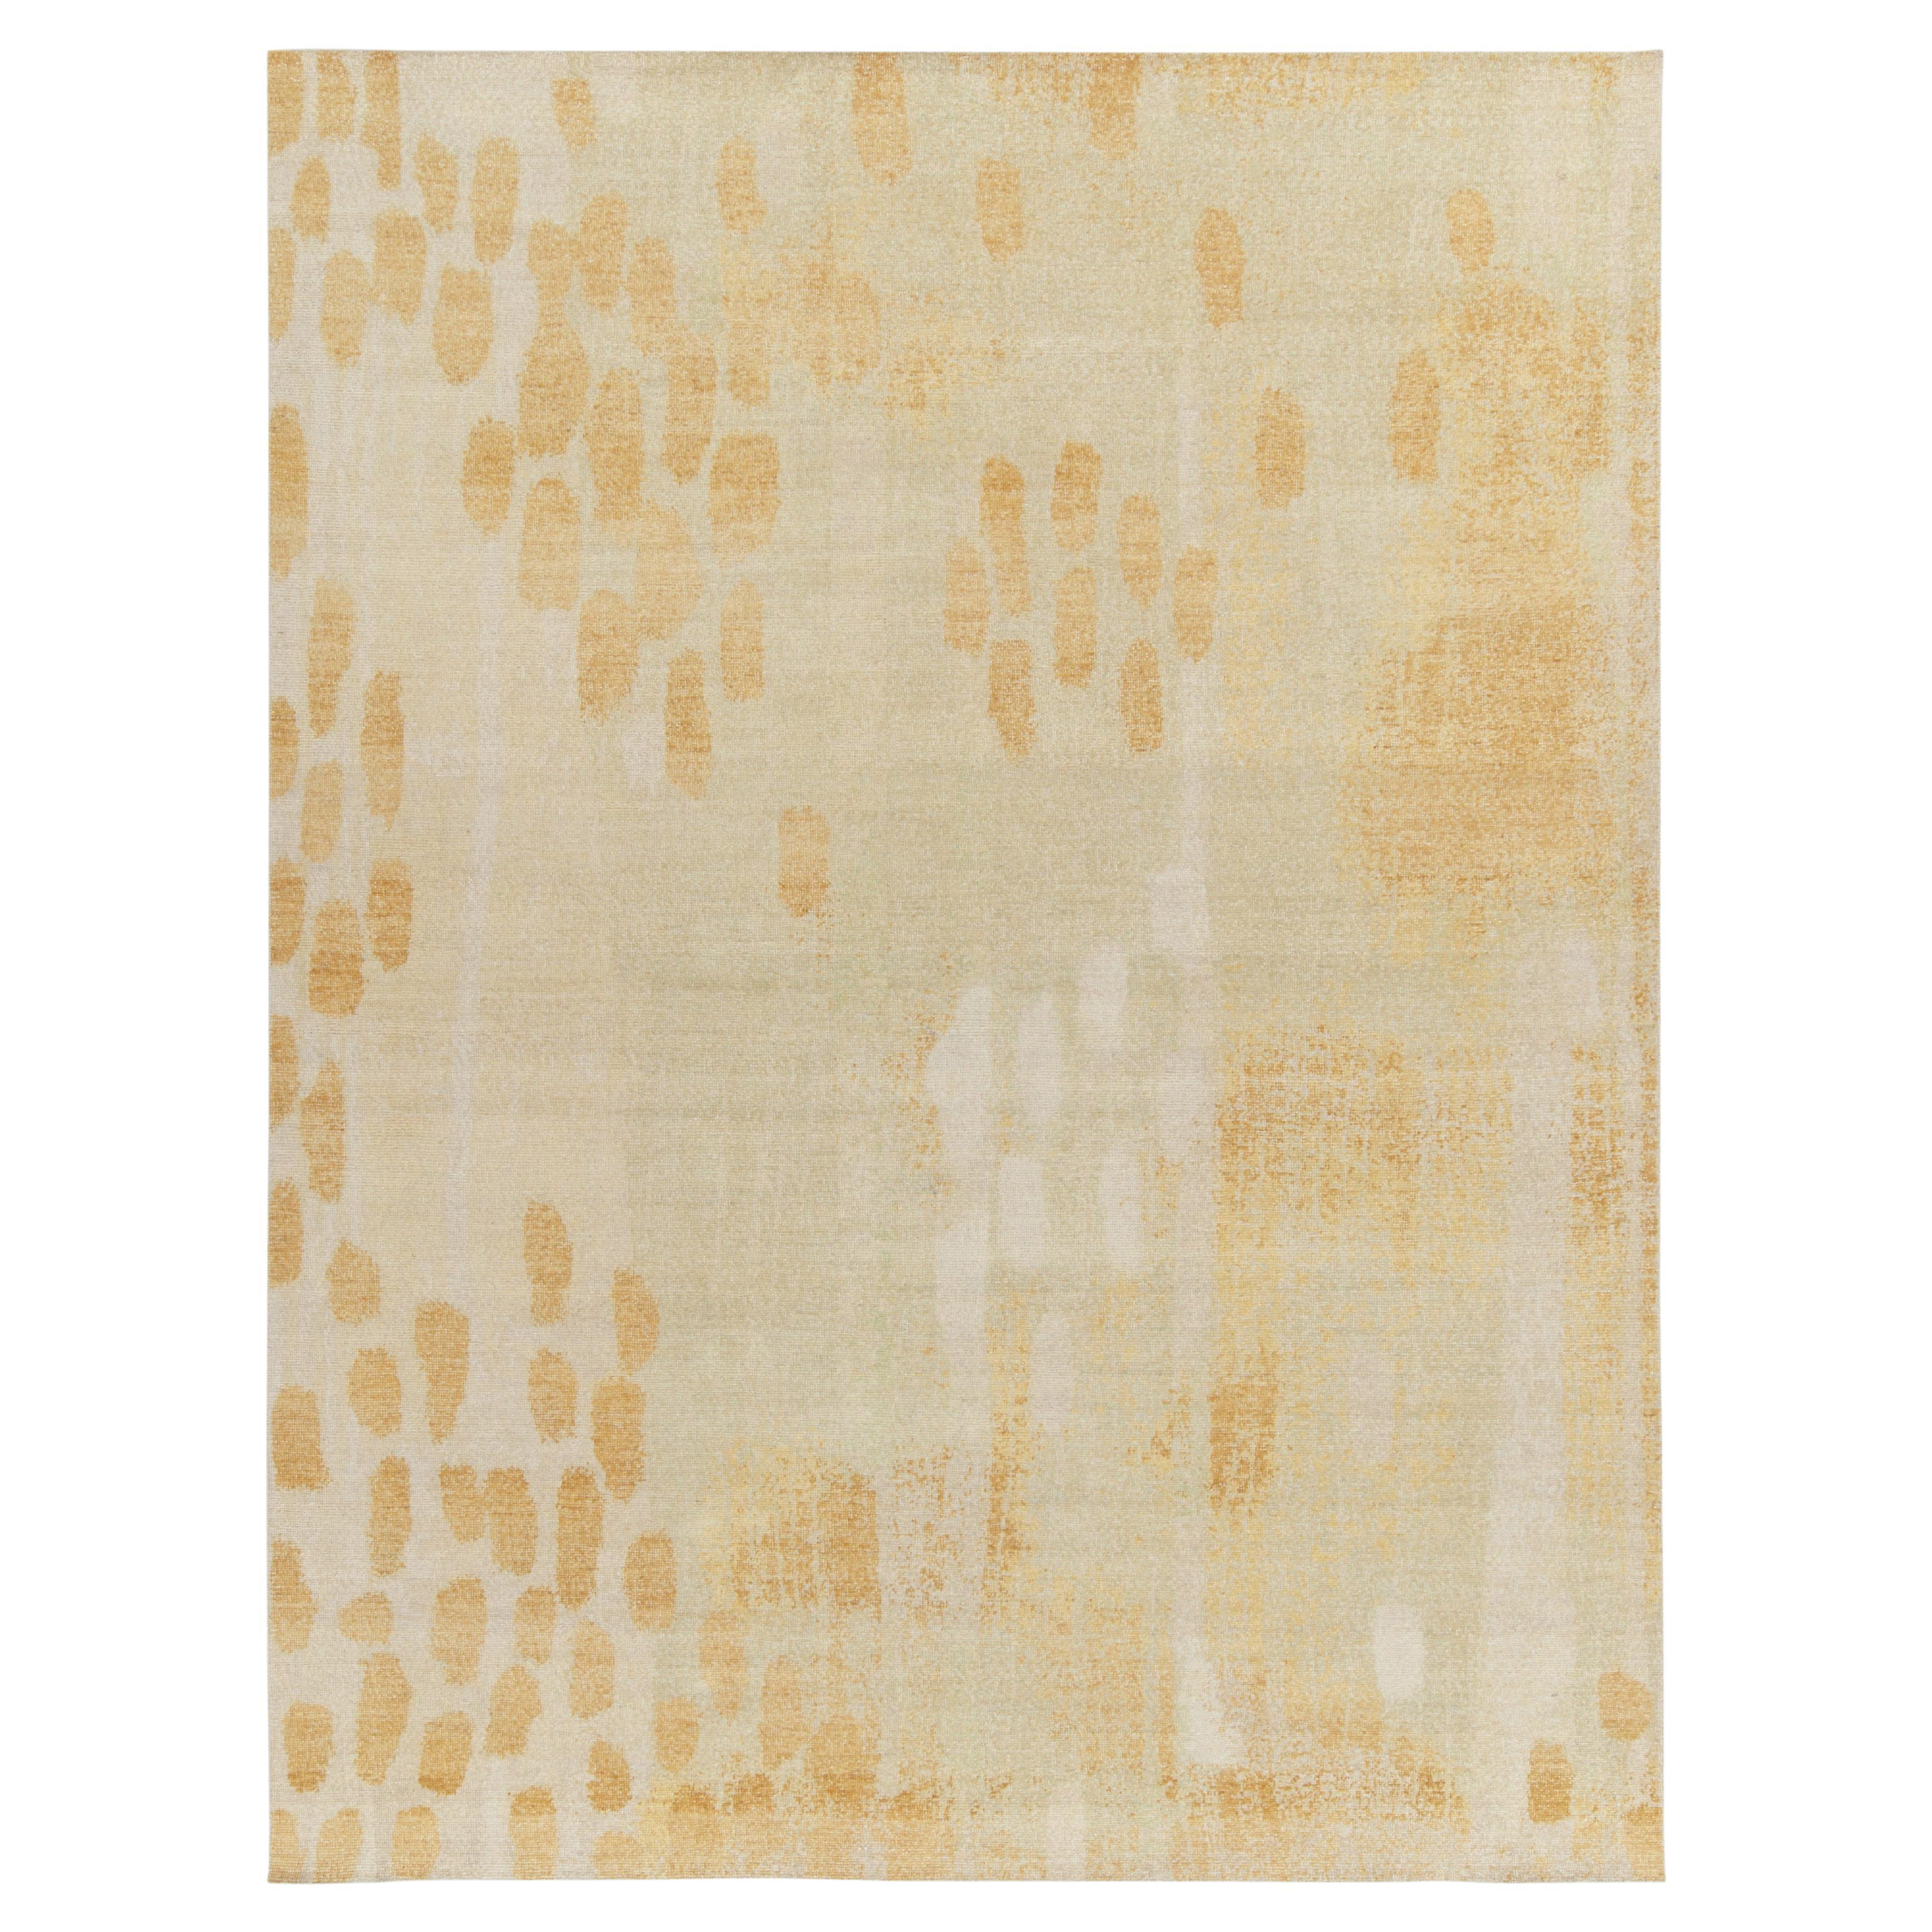 Rug & Kilim's Distressed Style Modern Rug in Cream, Gold, White Dots Pattern For Sale